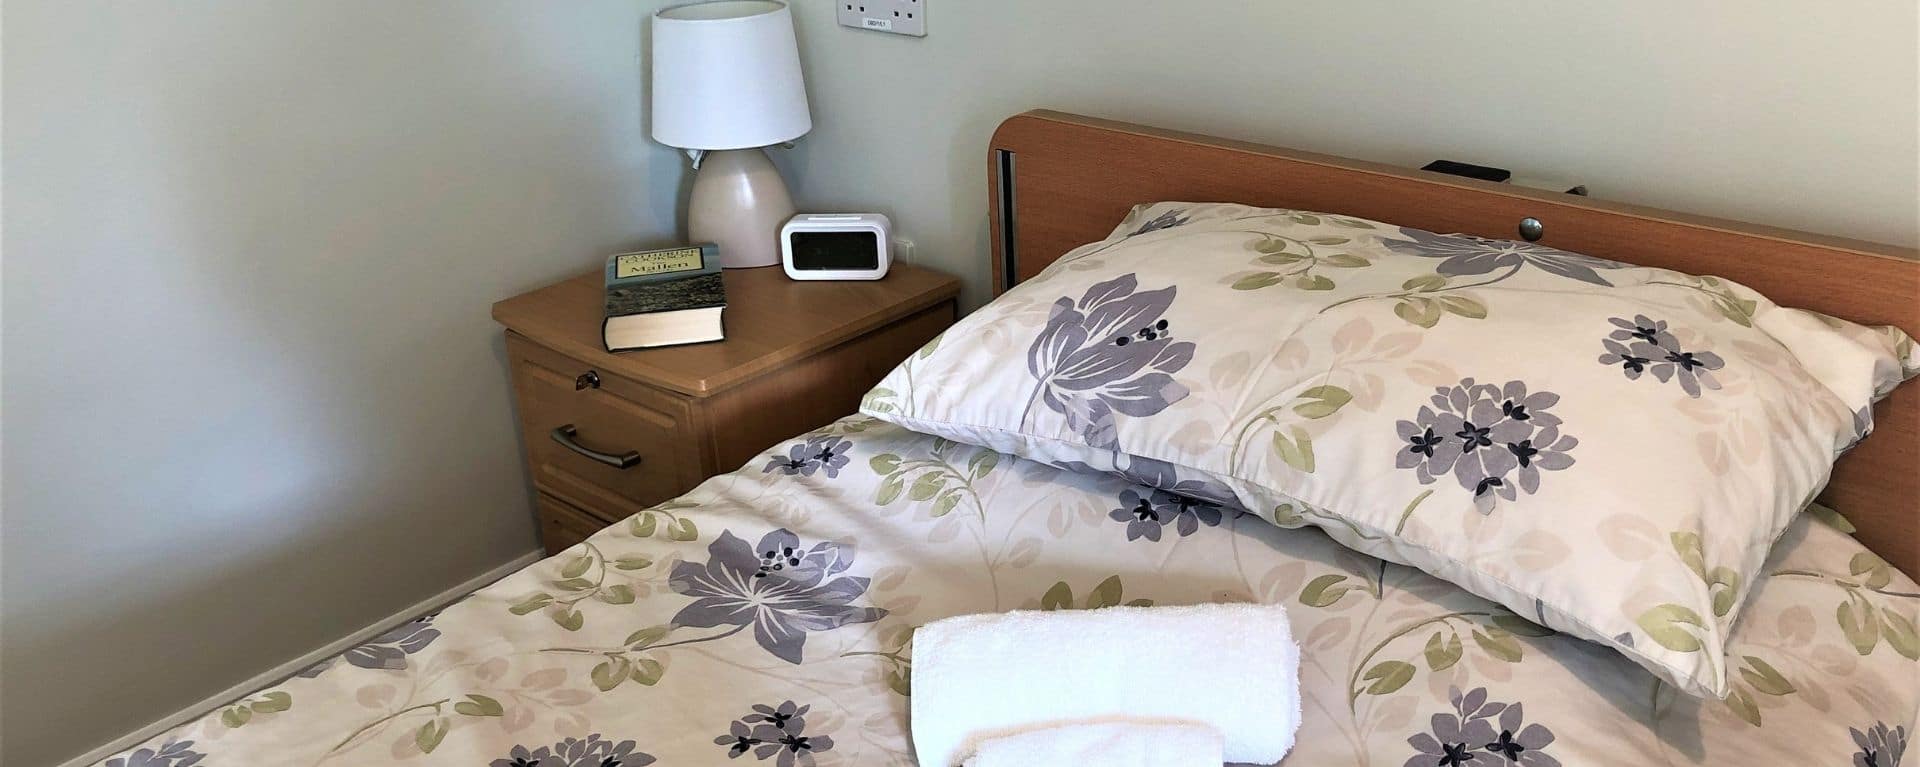 Residents bed side table at Laurel Care Home